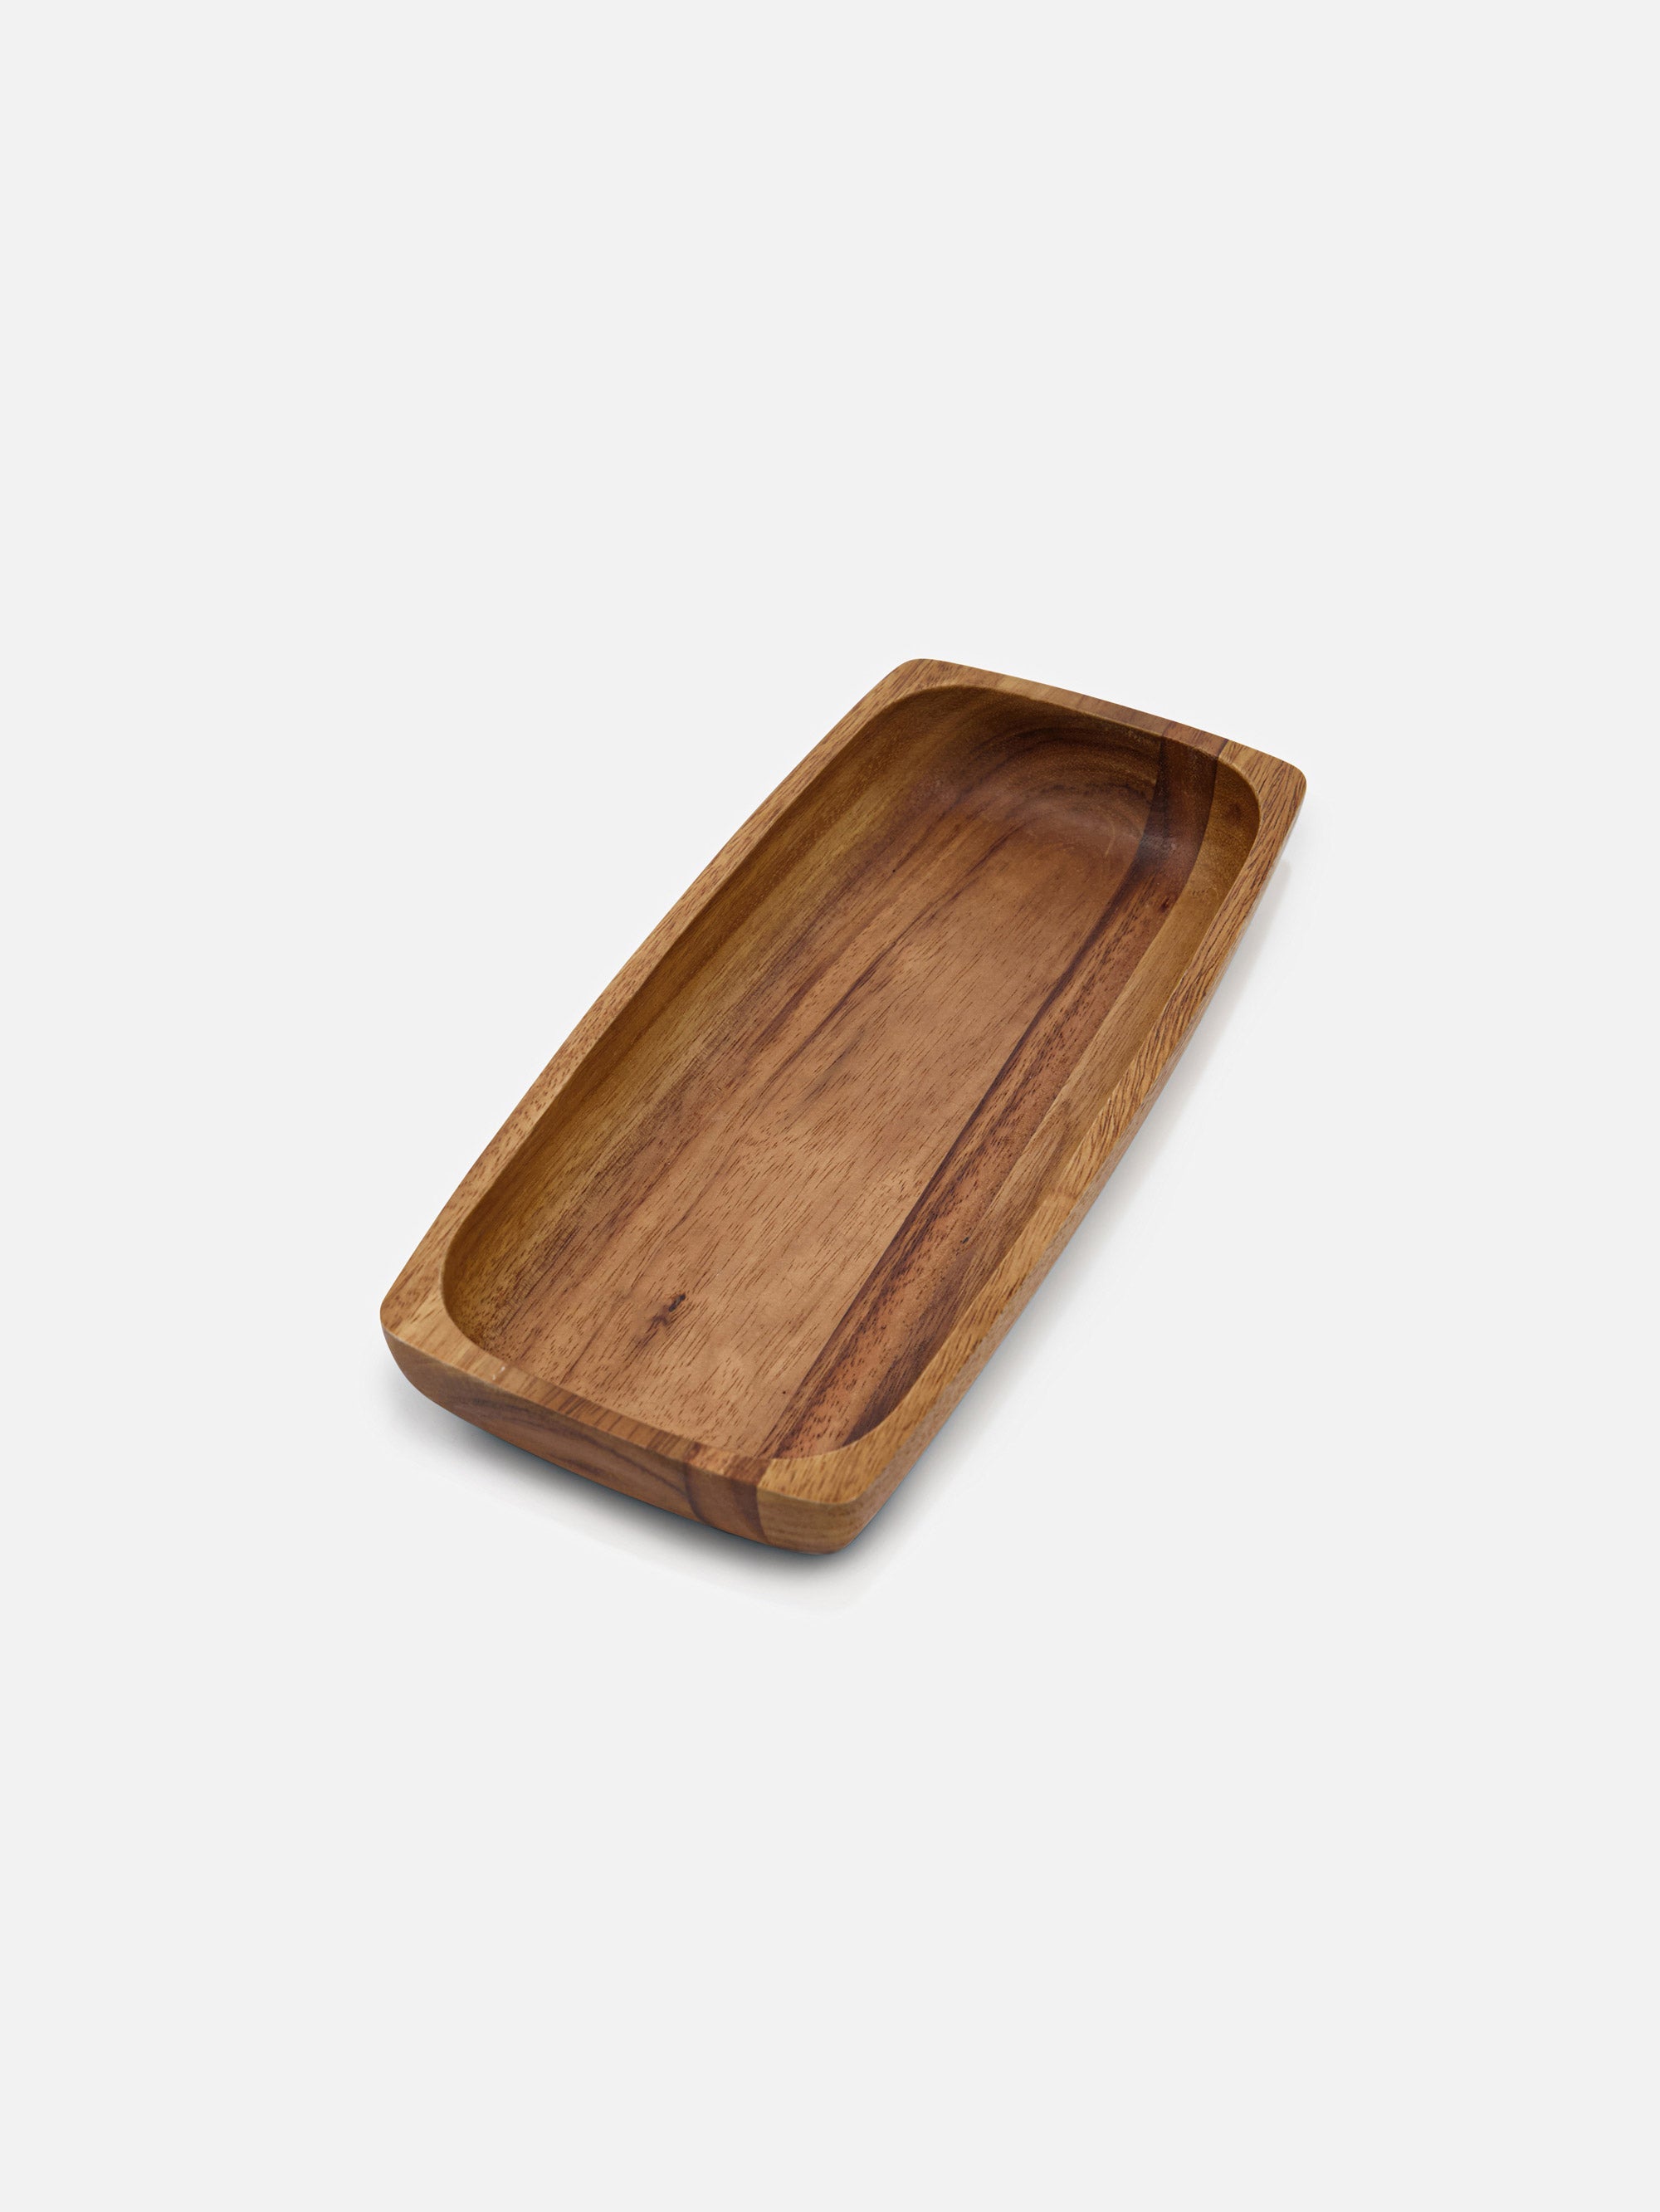 Acasia wood Serving Tray